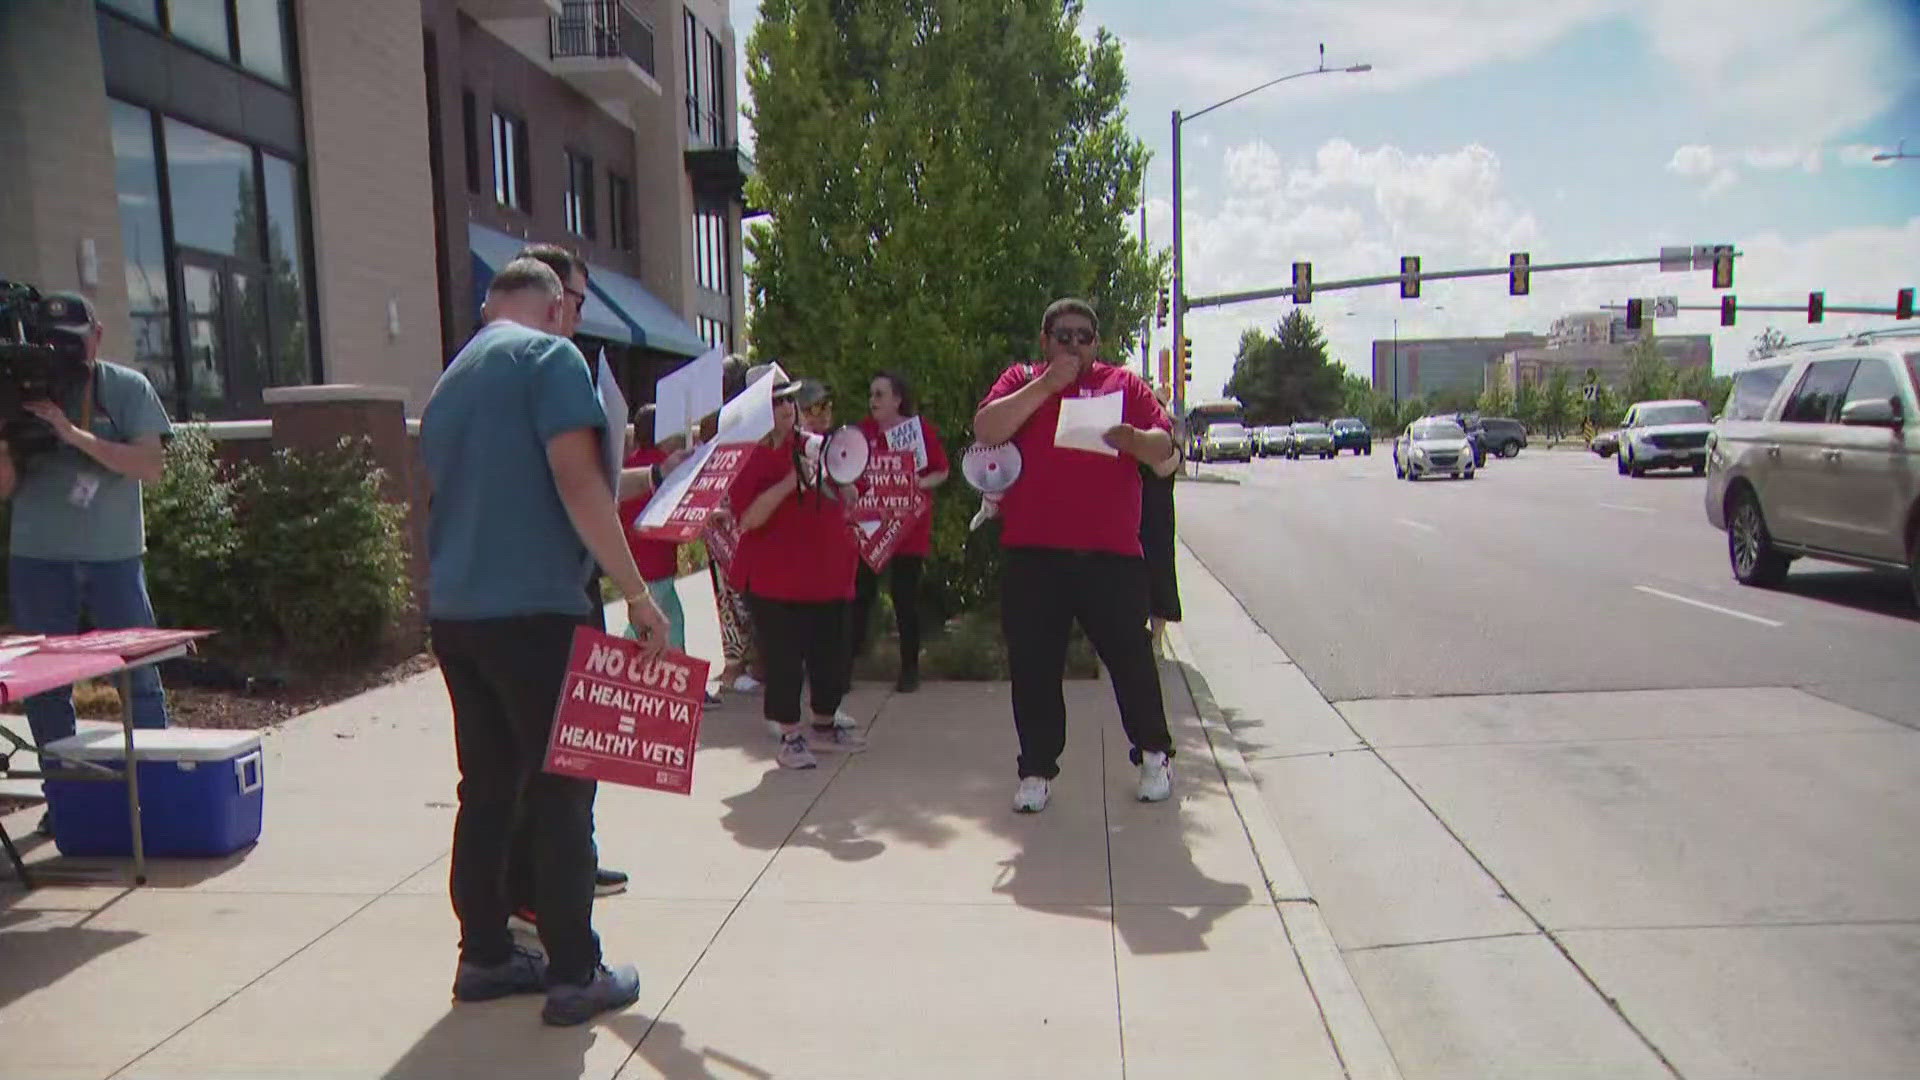 The National Nurses United union is calling for the end of a hiring freeze that they say has impacted operations since January.